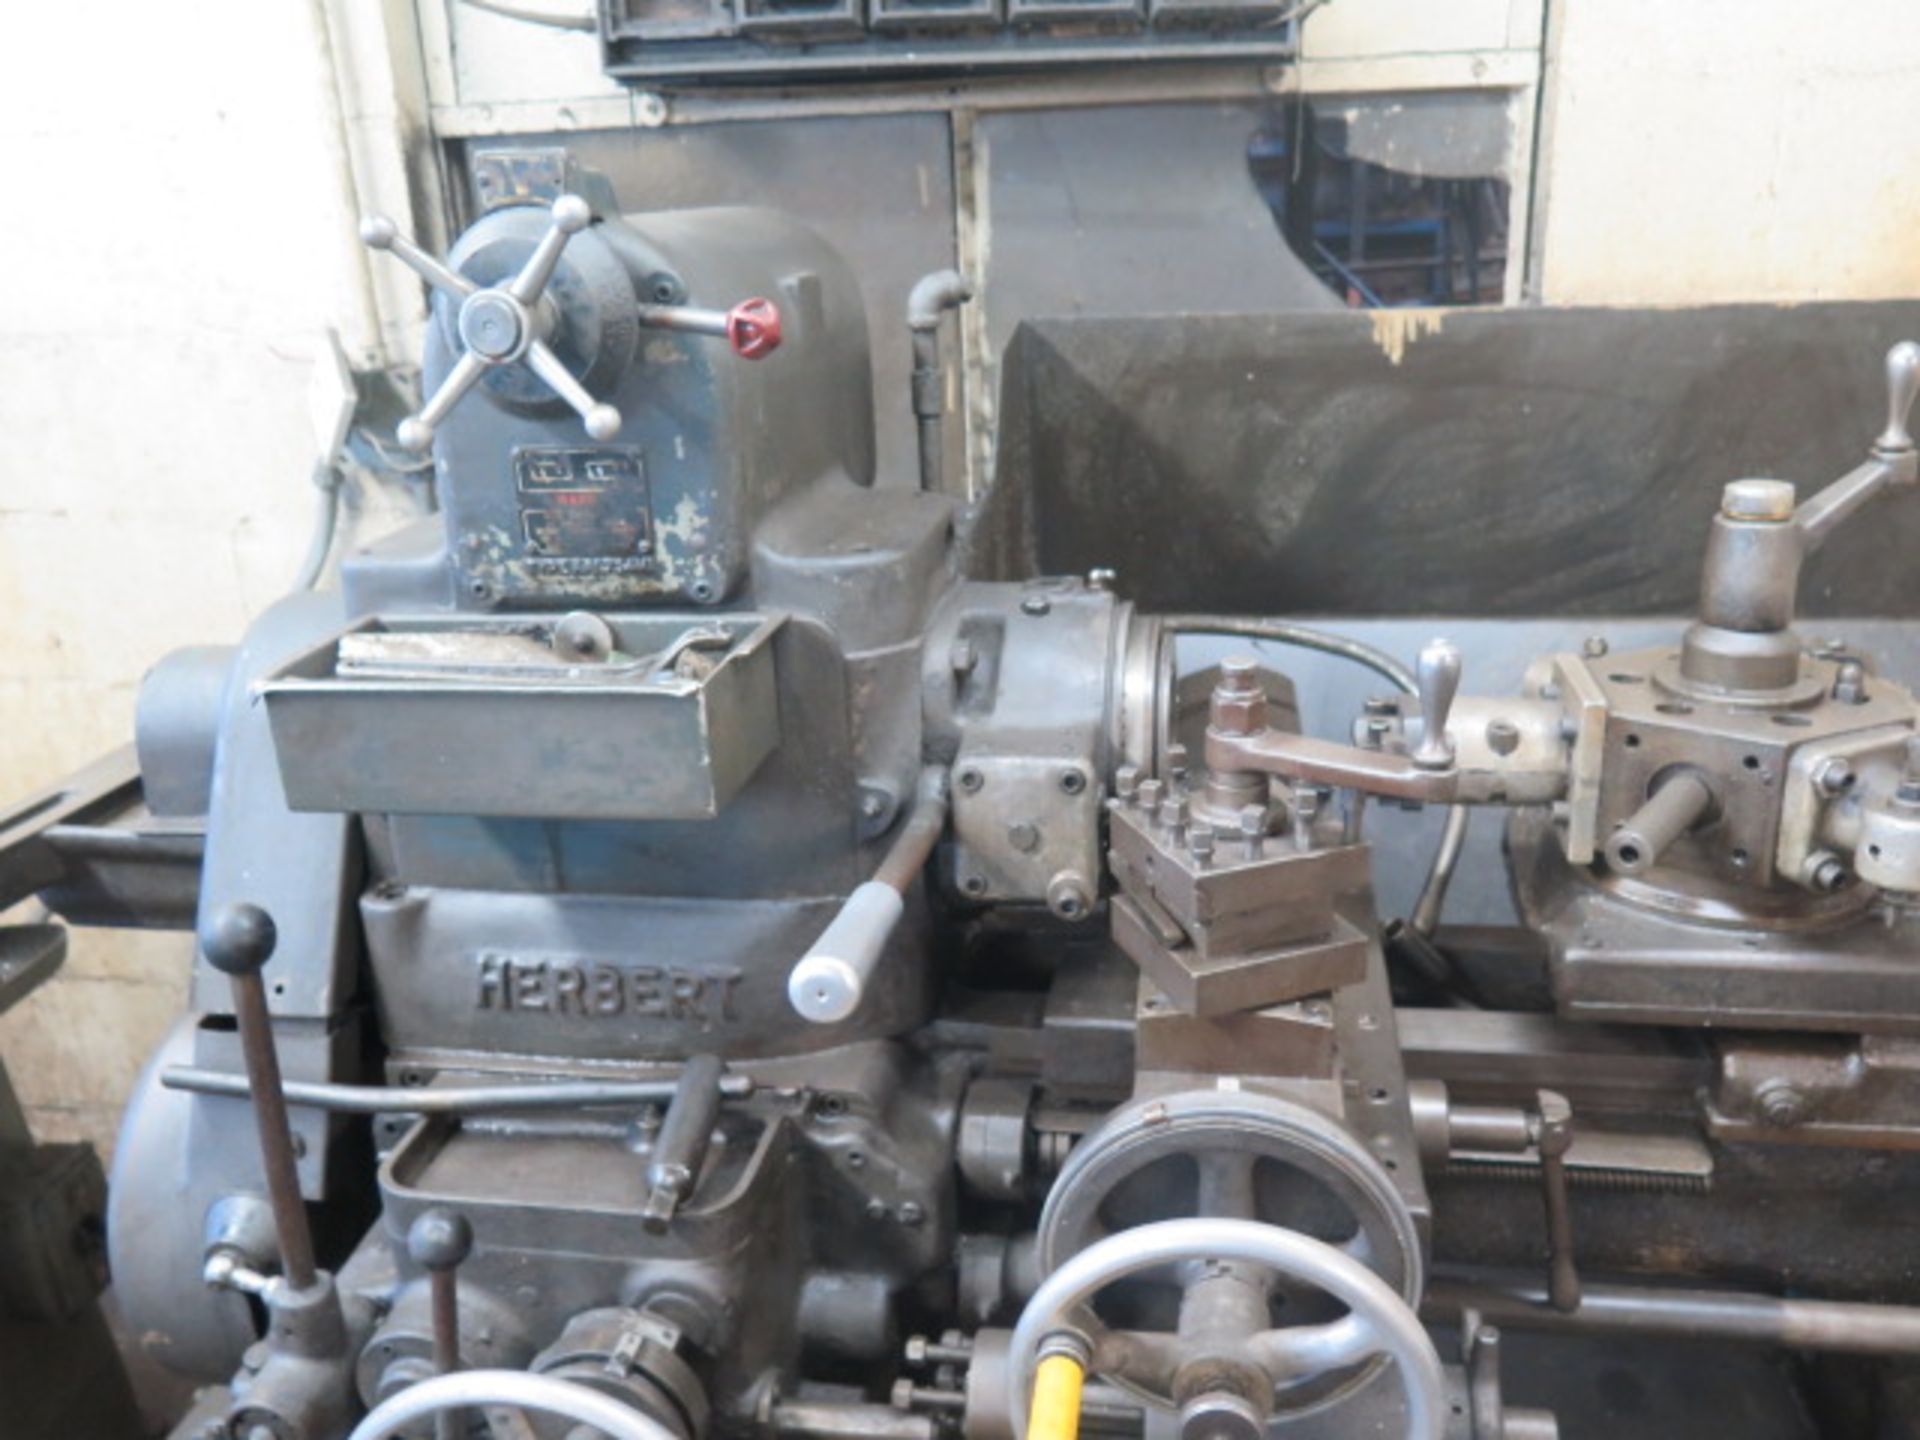 Herbert Turret Lathe w/ 50-2550 RPM, 6-Station Turret, Colleted Spindle, Coolant - Image 4 of 6